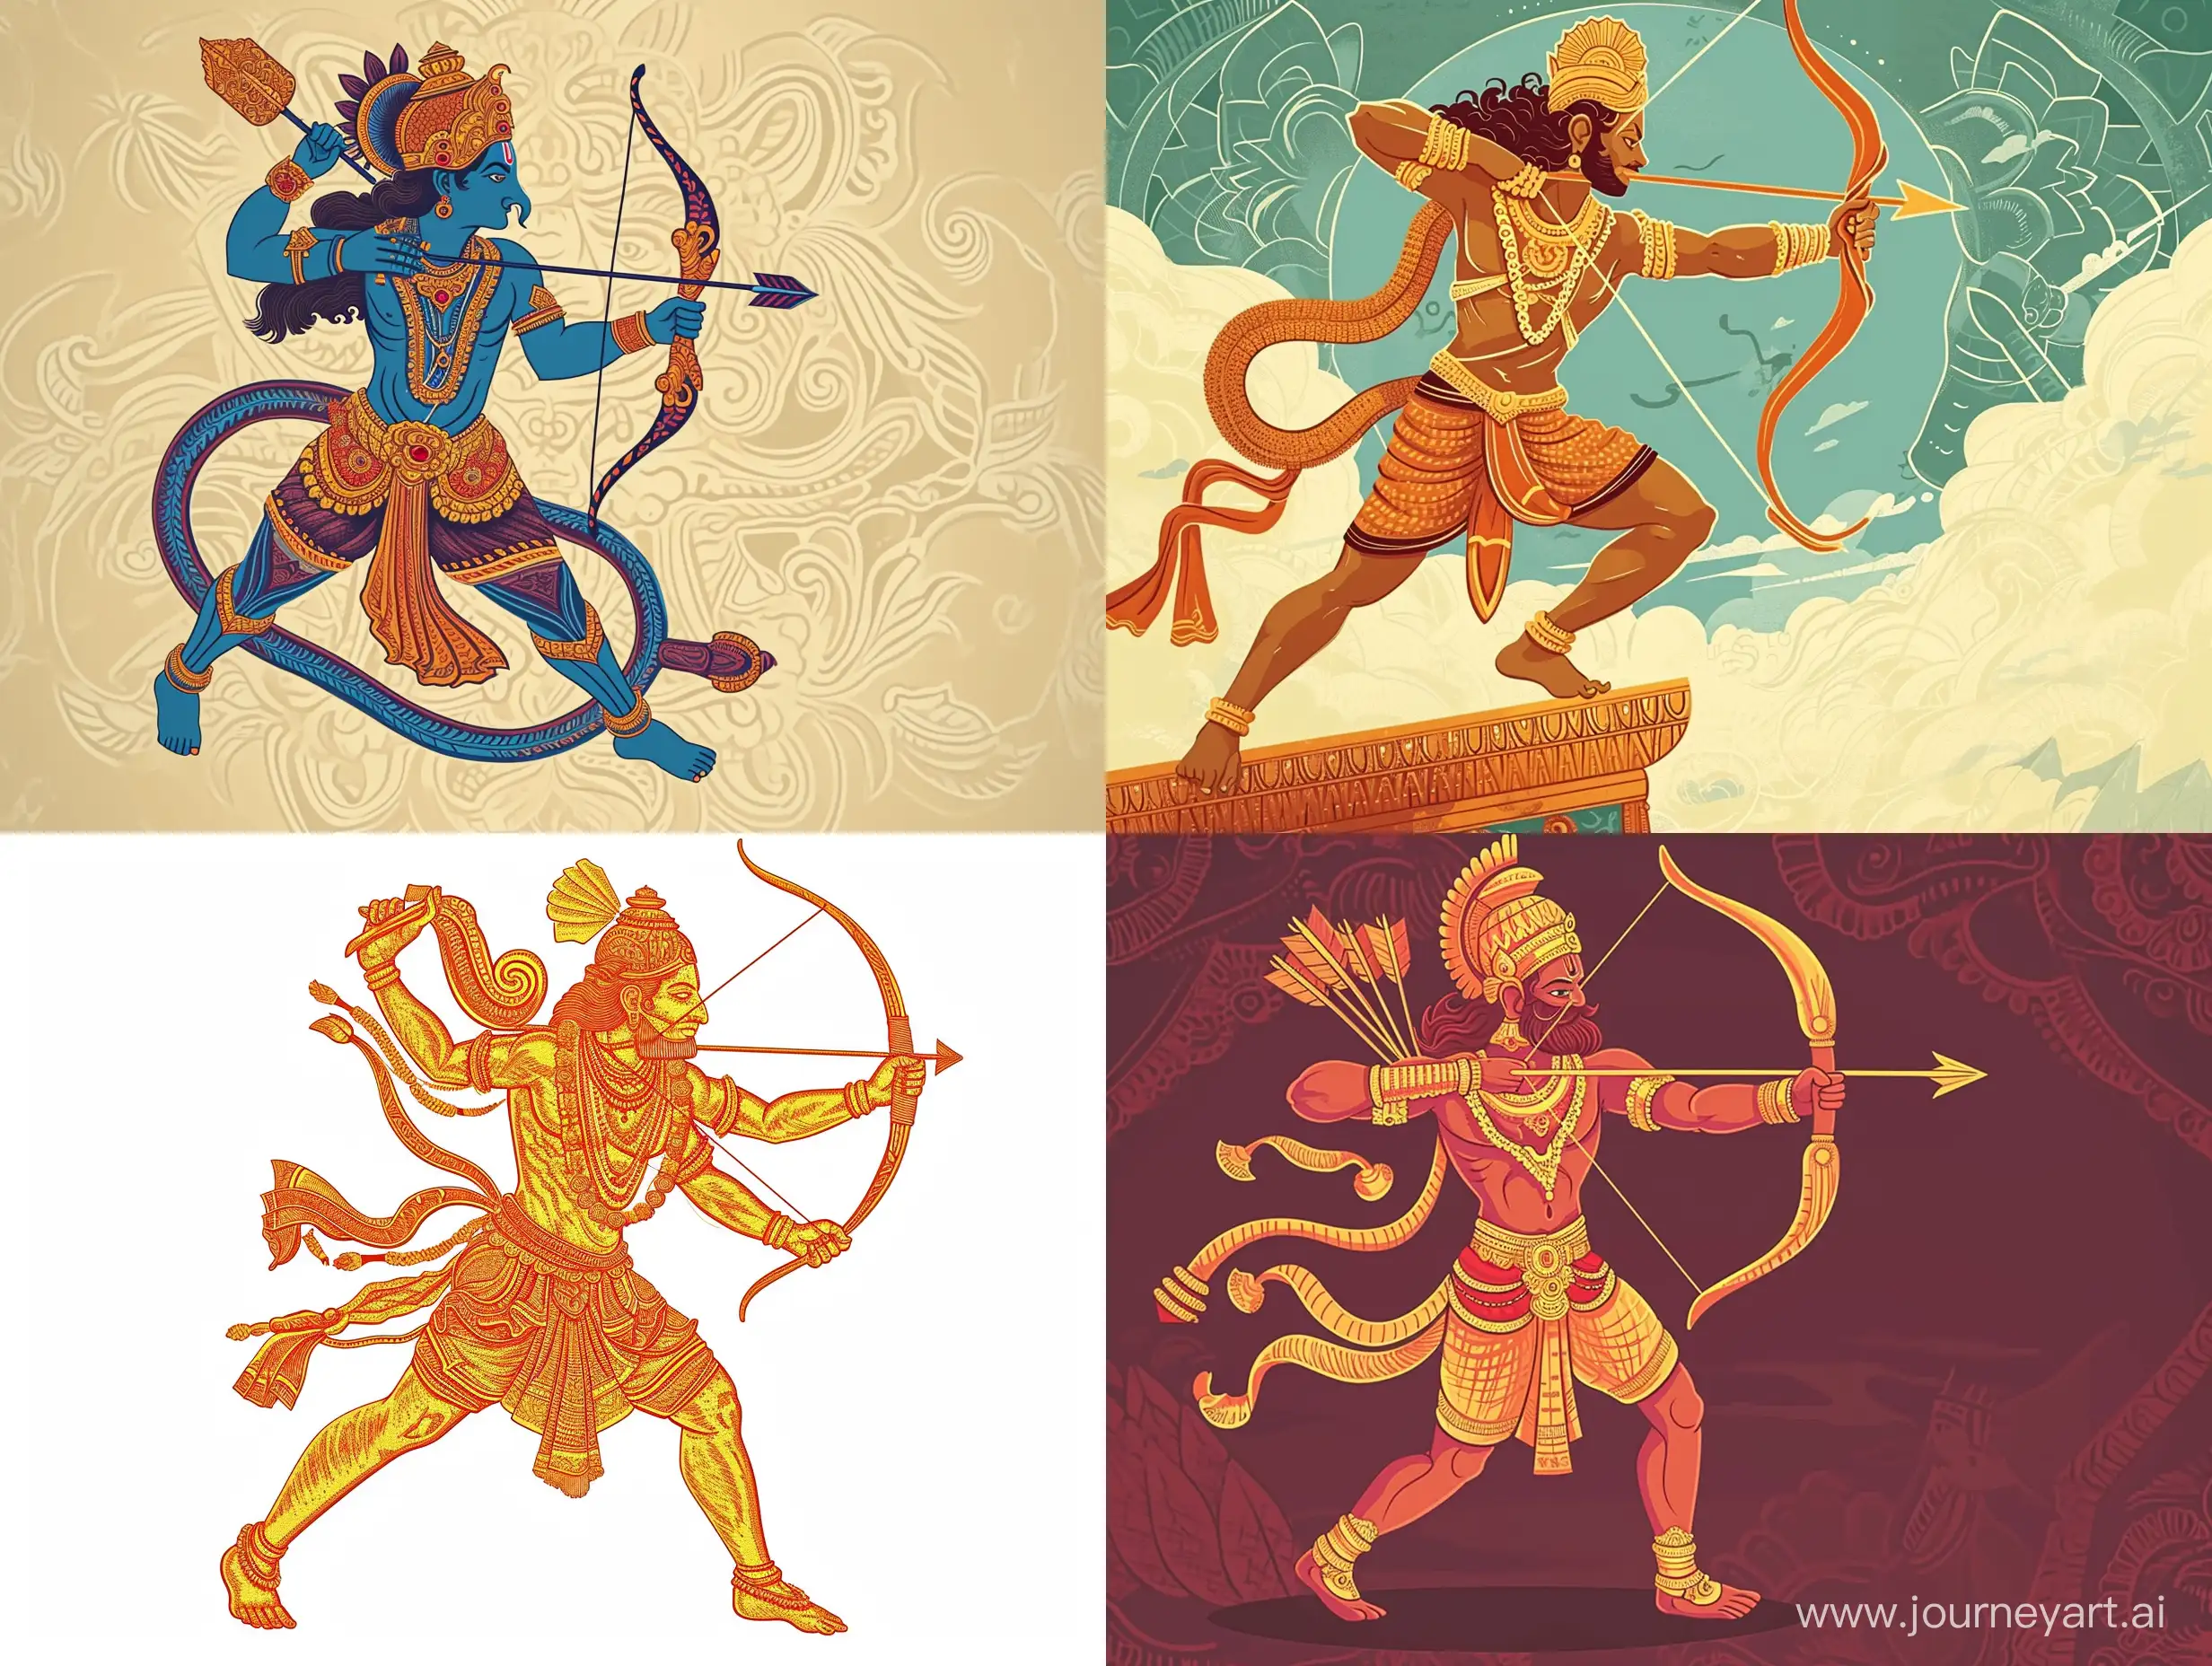 Shri-Ram-Breaking-the-Arrow-Ancient-Hindu-Glory-in-a-Bold-and-Creative-Illustration